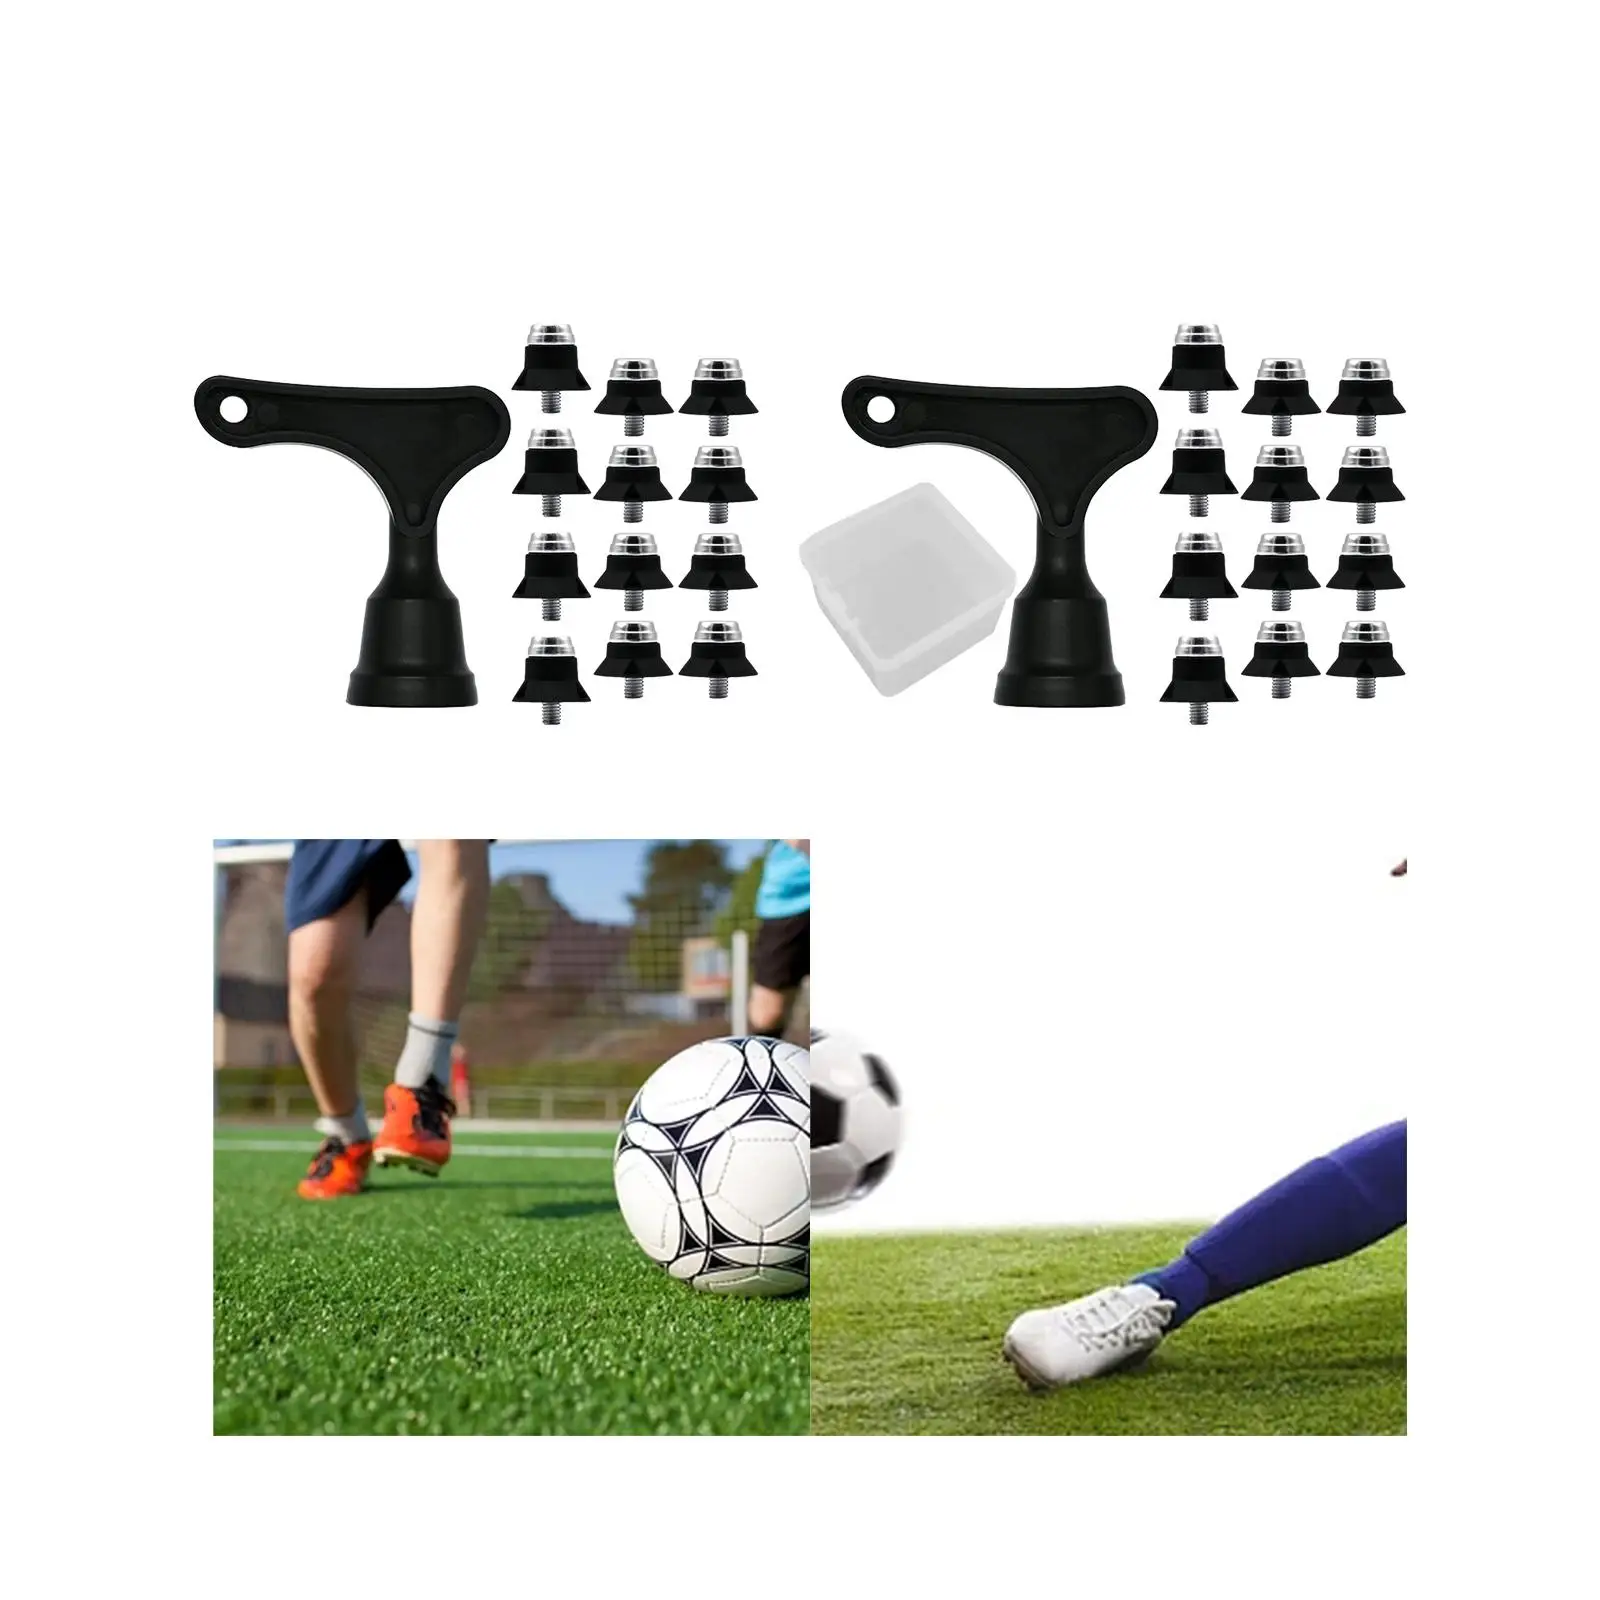 12x Replacement Football Studs Stable M5 Soccer Studs Football Boot Spikes for Training Indoor Outdoor Sports Athletic Sneakers